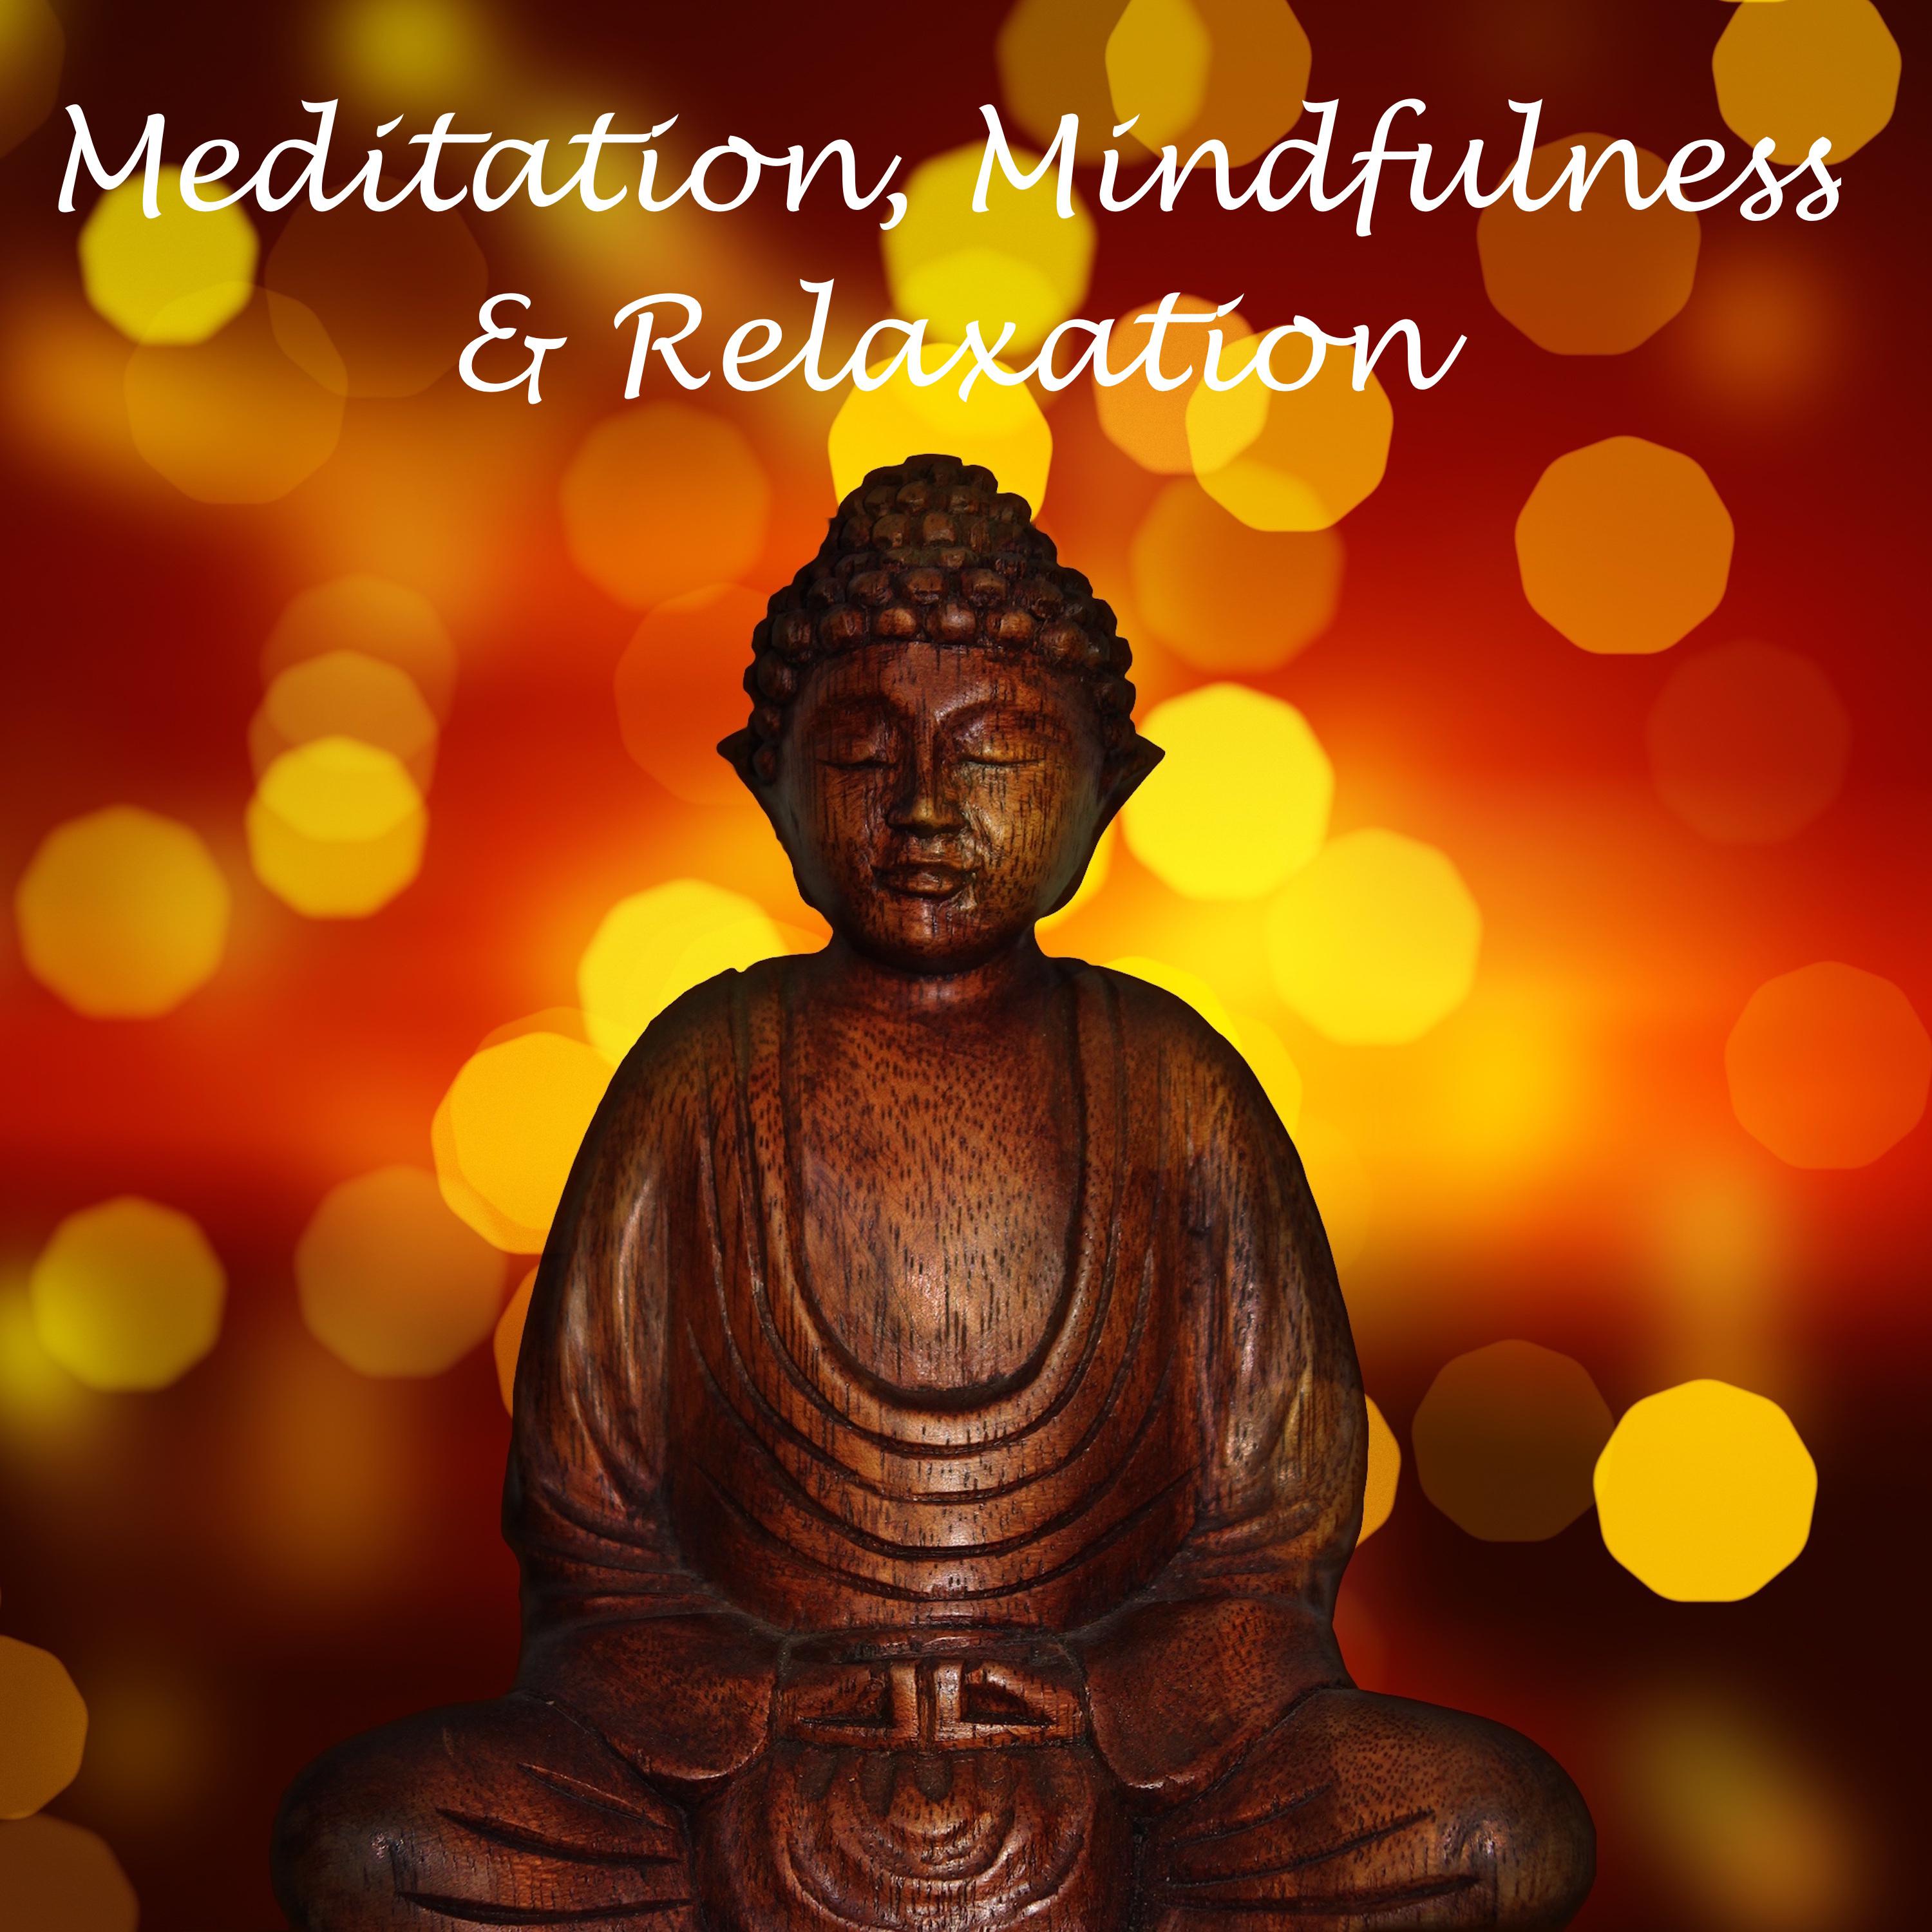 14 Spa and Relaxation Sounds, Rain Sounds for Meditation, Spa Treatment, Relaxation, Wellbeing and Mindfulness